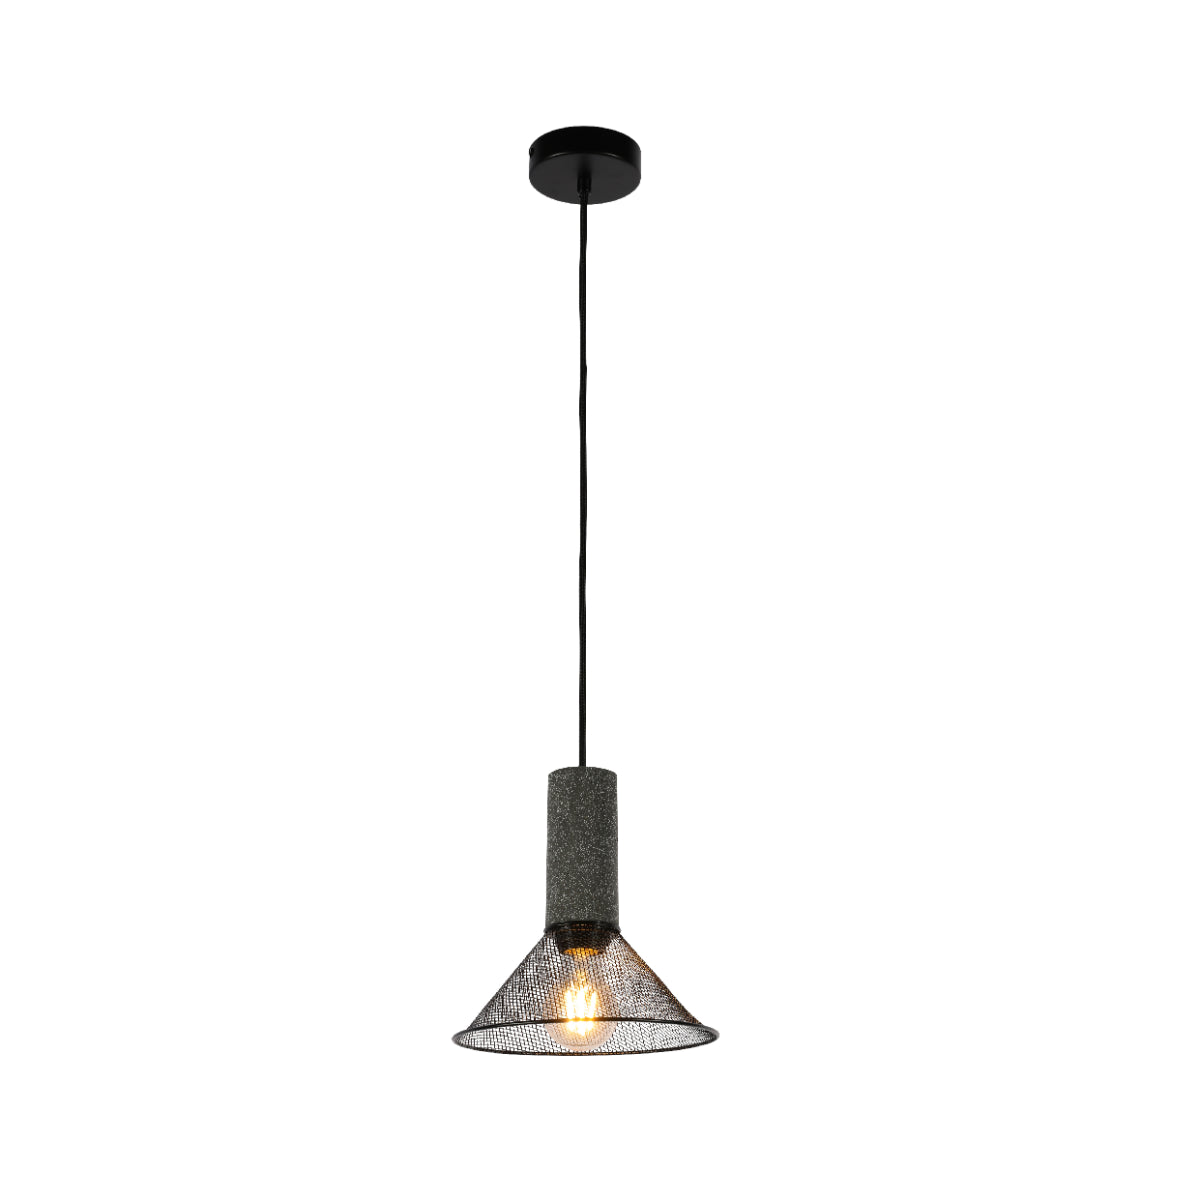 Main image of Quartet of Textured Concrete Pendant Lights with Metal Shades - TEKLED 150-19052